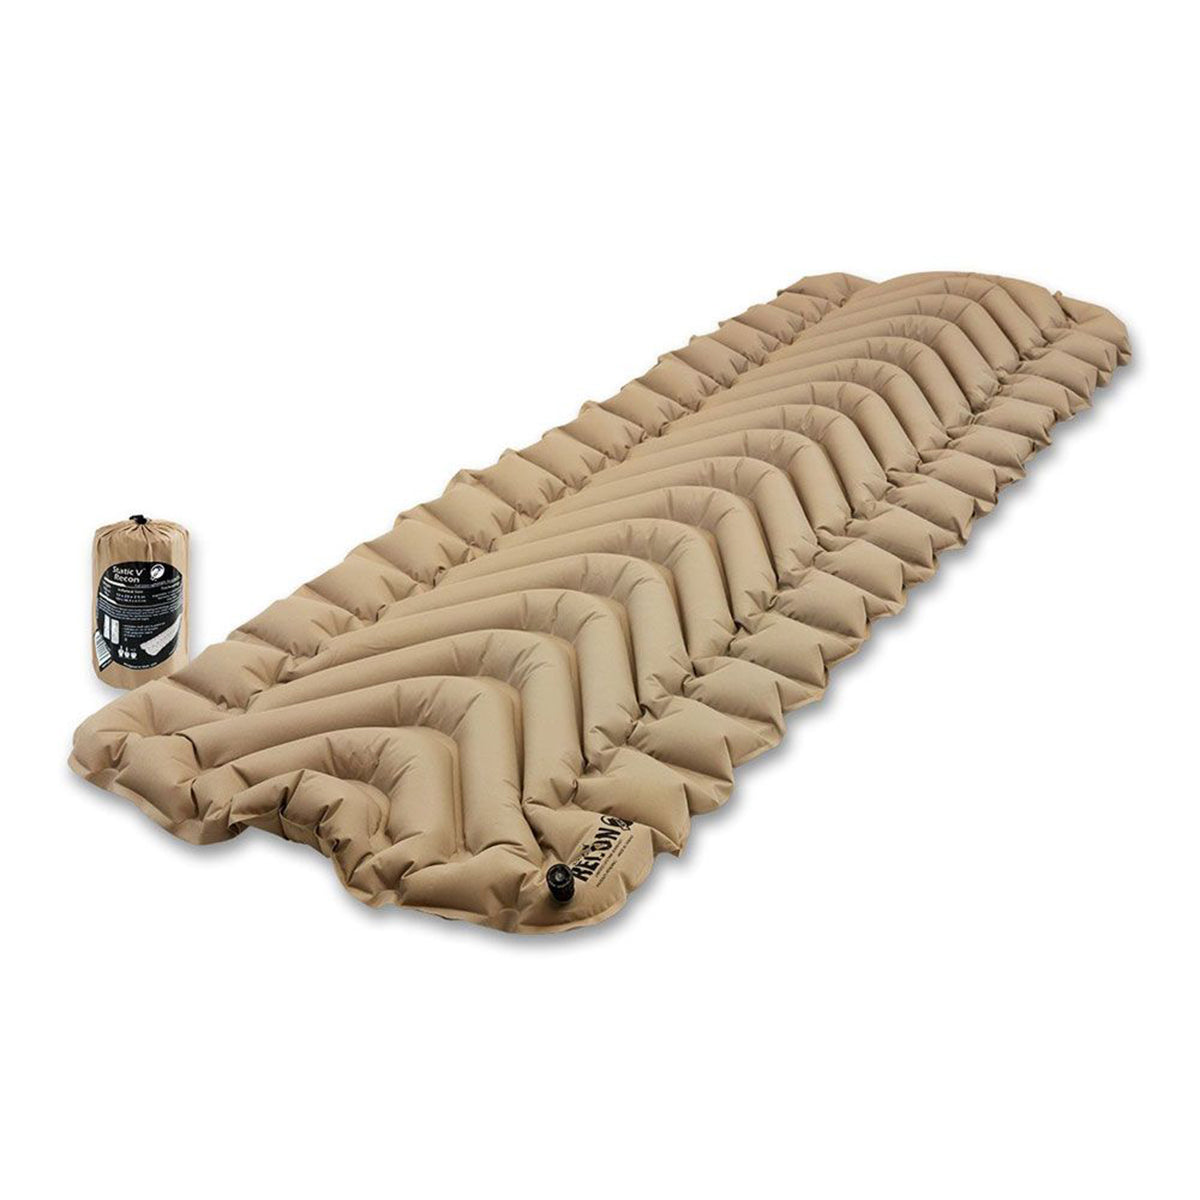 Klymit Static V Recon Sleeping Pad by Klymit | Camping - goHUNT Shop